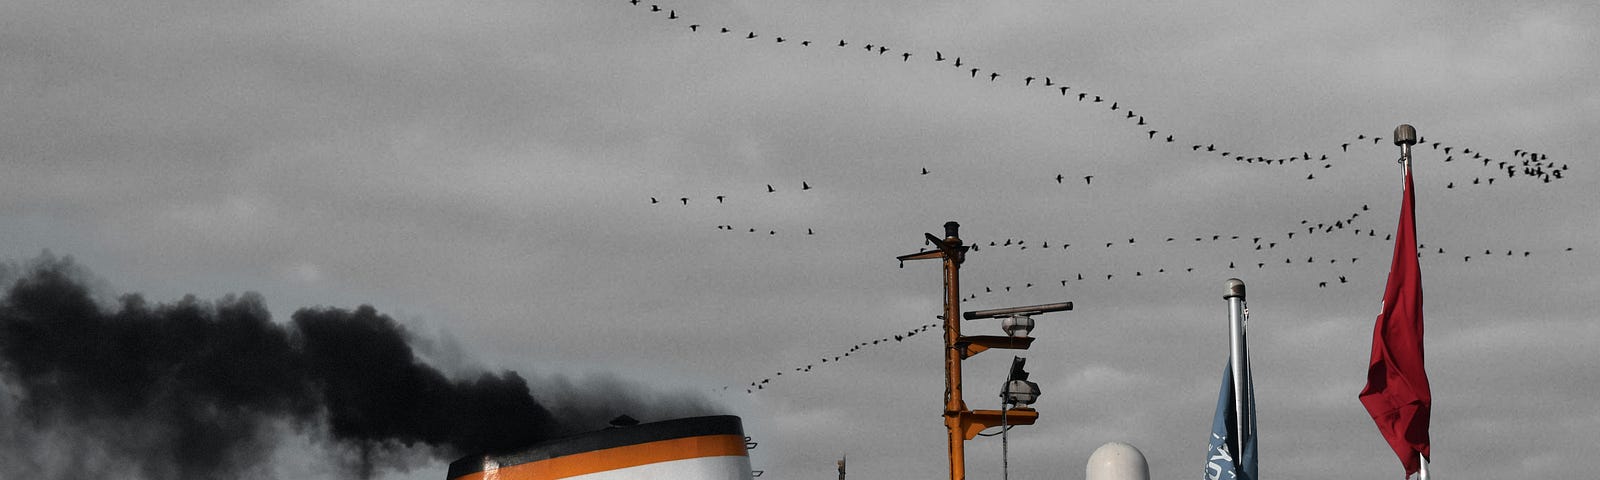 A cruise ship billowing toxic smoke into the air. A flock of birds flies in the background